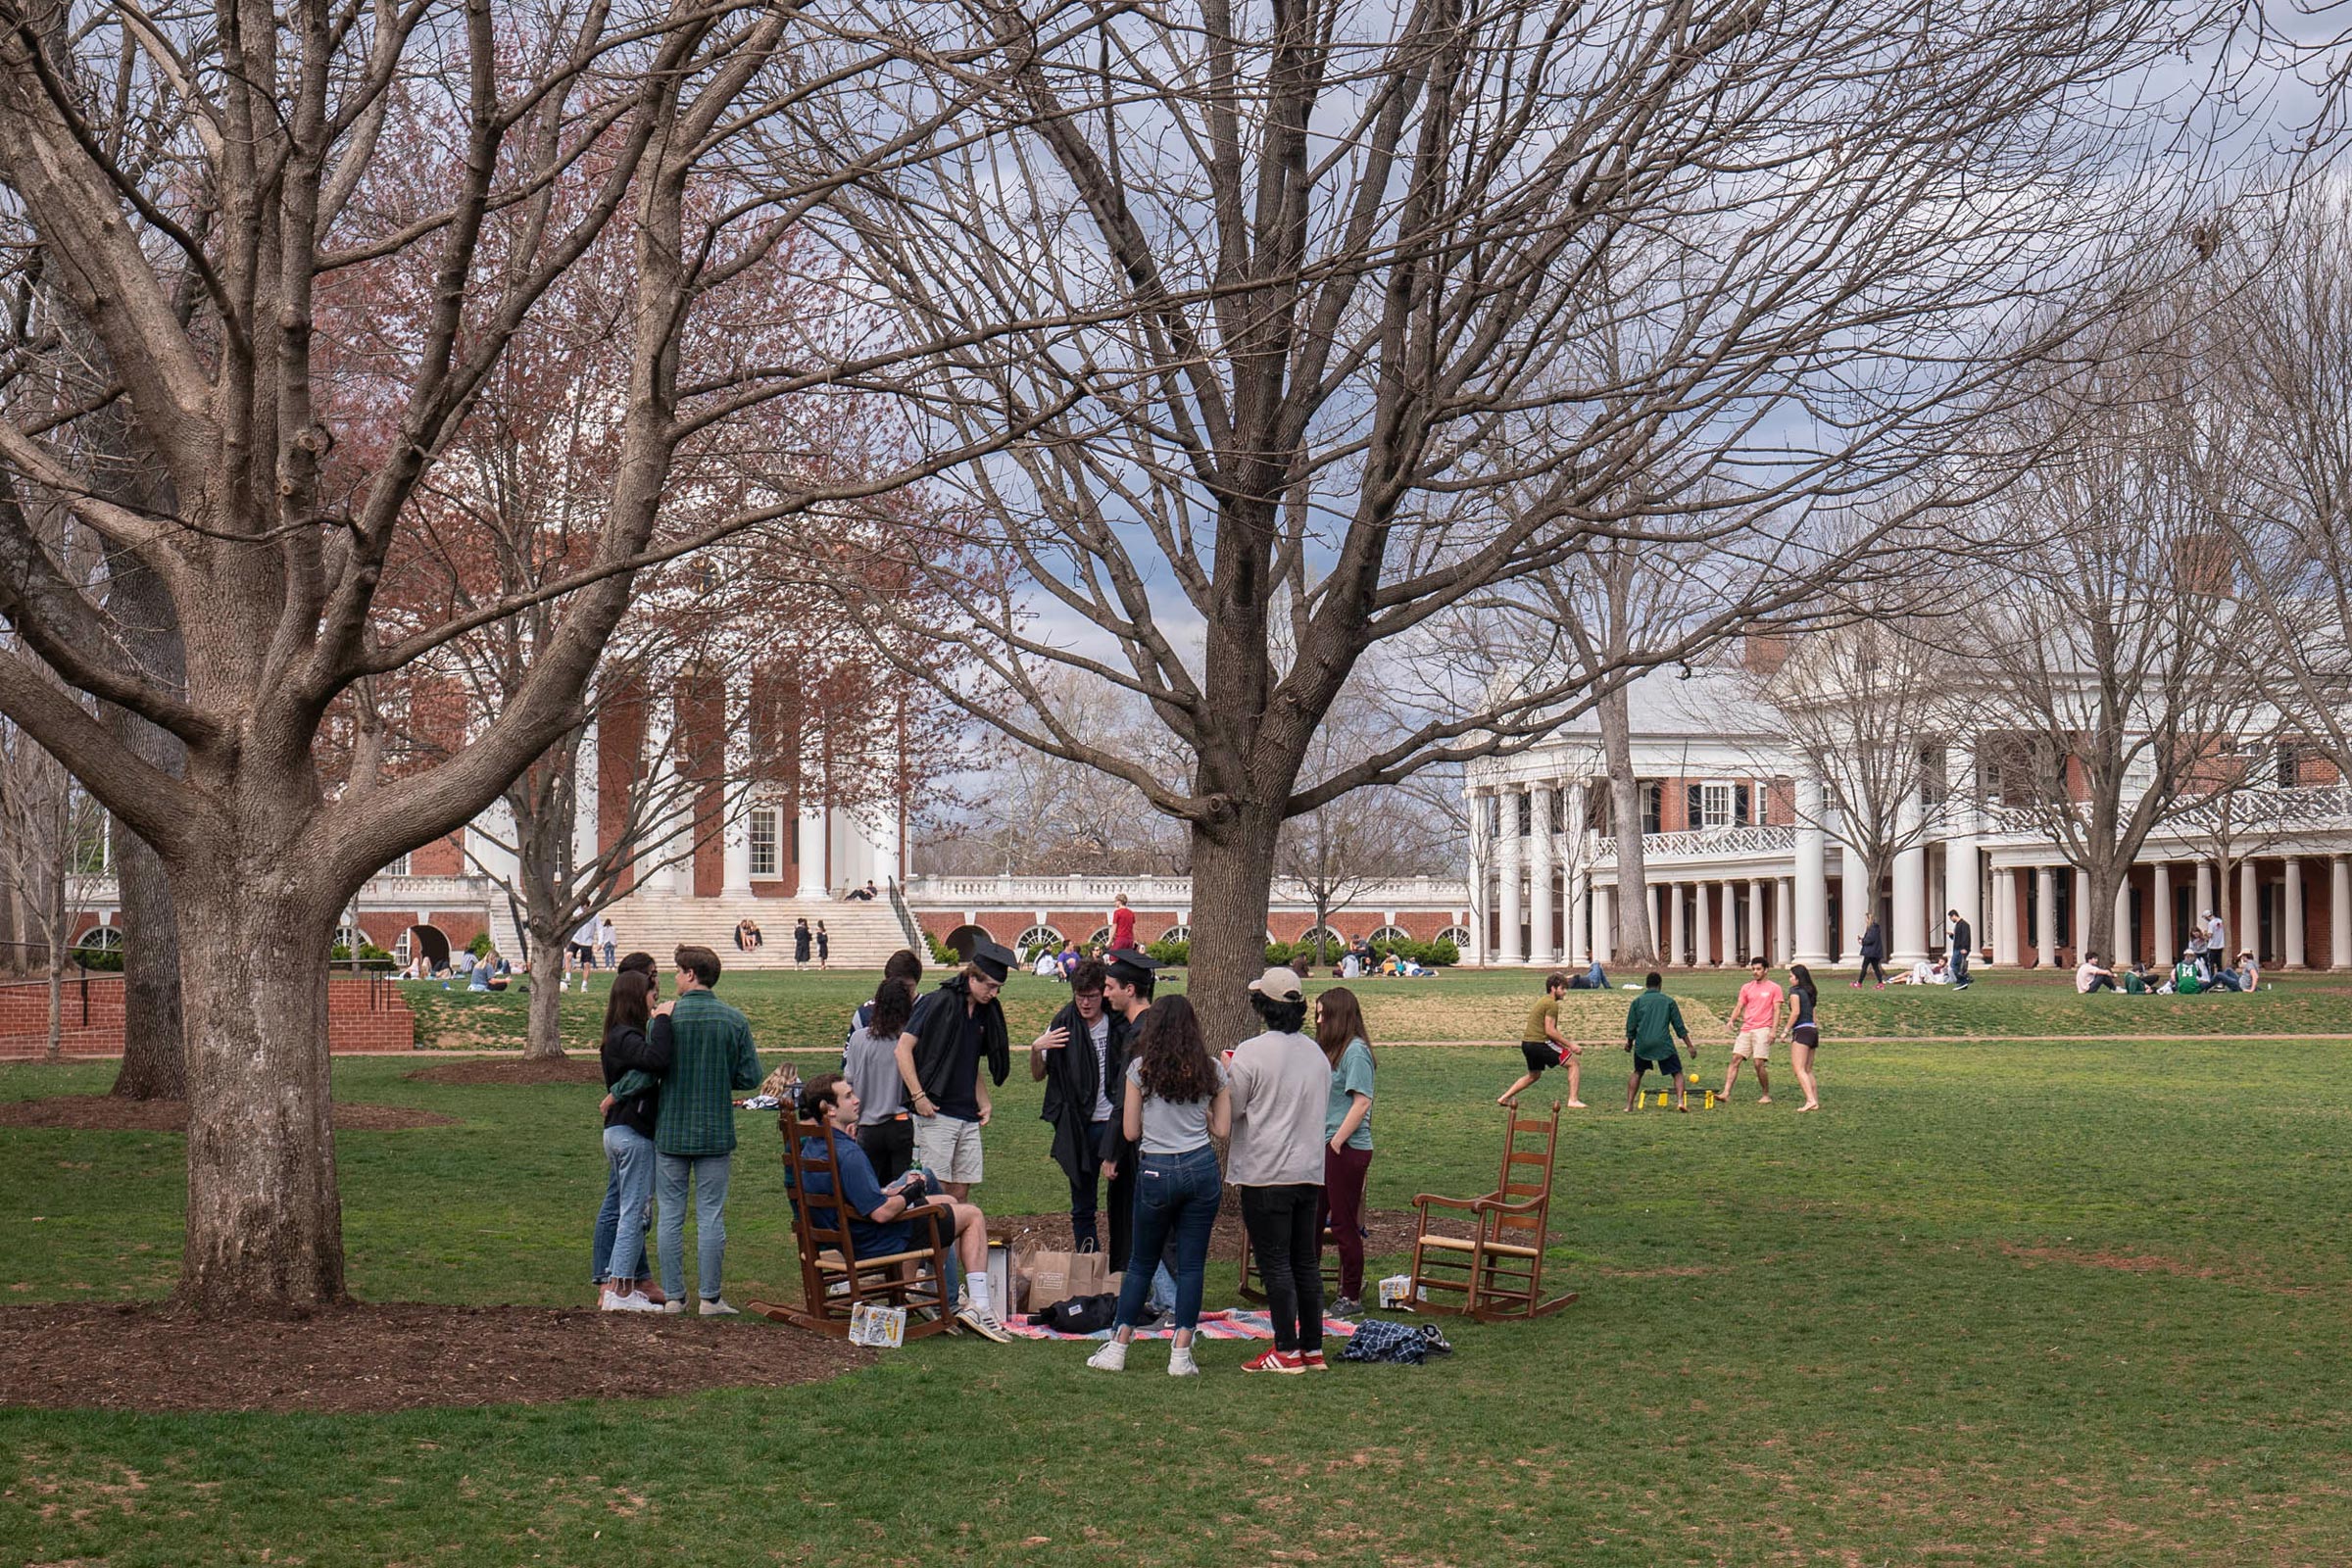 Groups of students gathering on the Lawn playing games and talking